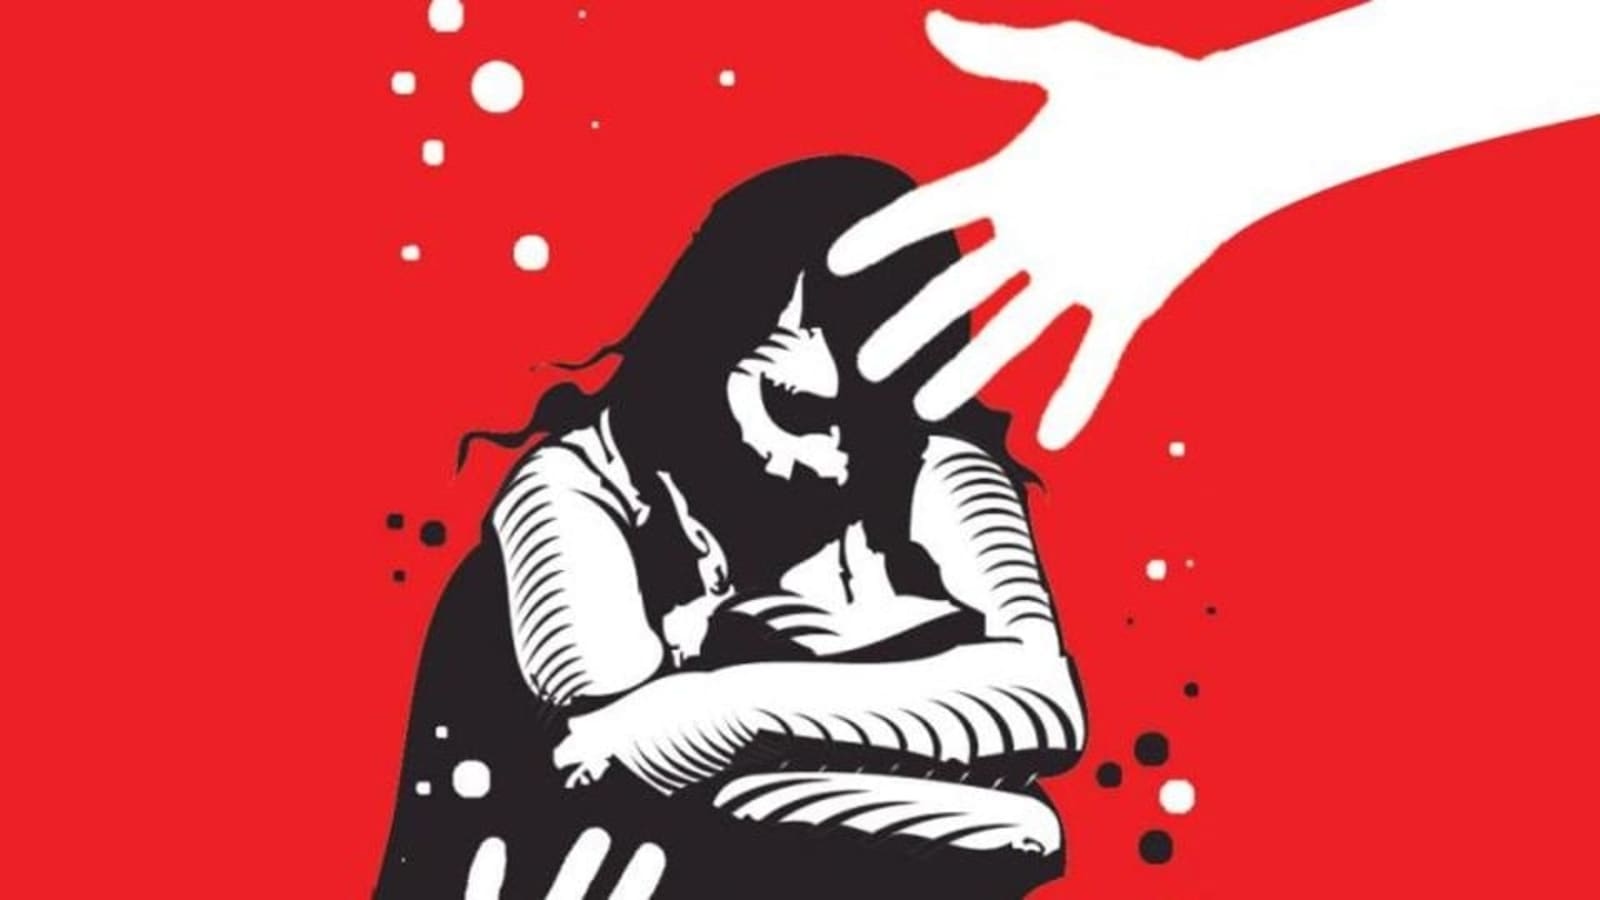 Bihar Girl Reap Mms - Raped by 10-15 men every day at Gurugram spa, ordeal recorded, alleges teen  | Latest News India - Hindustan Times